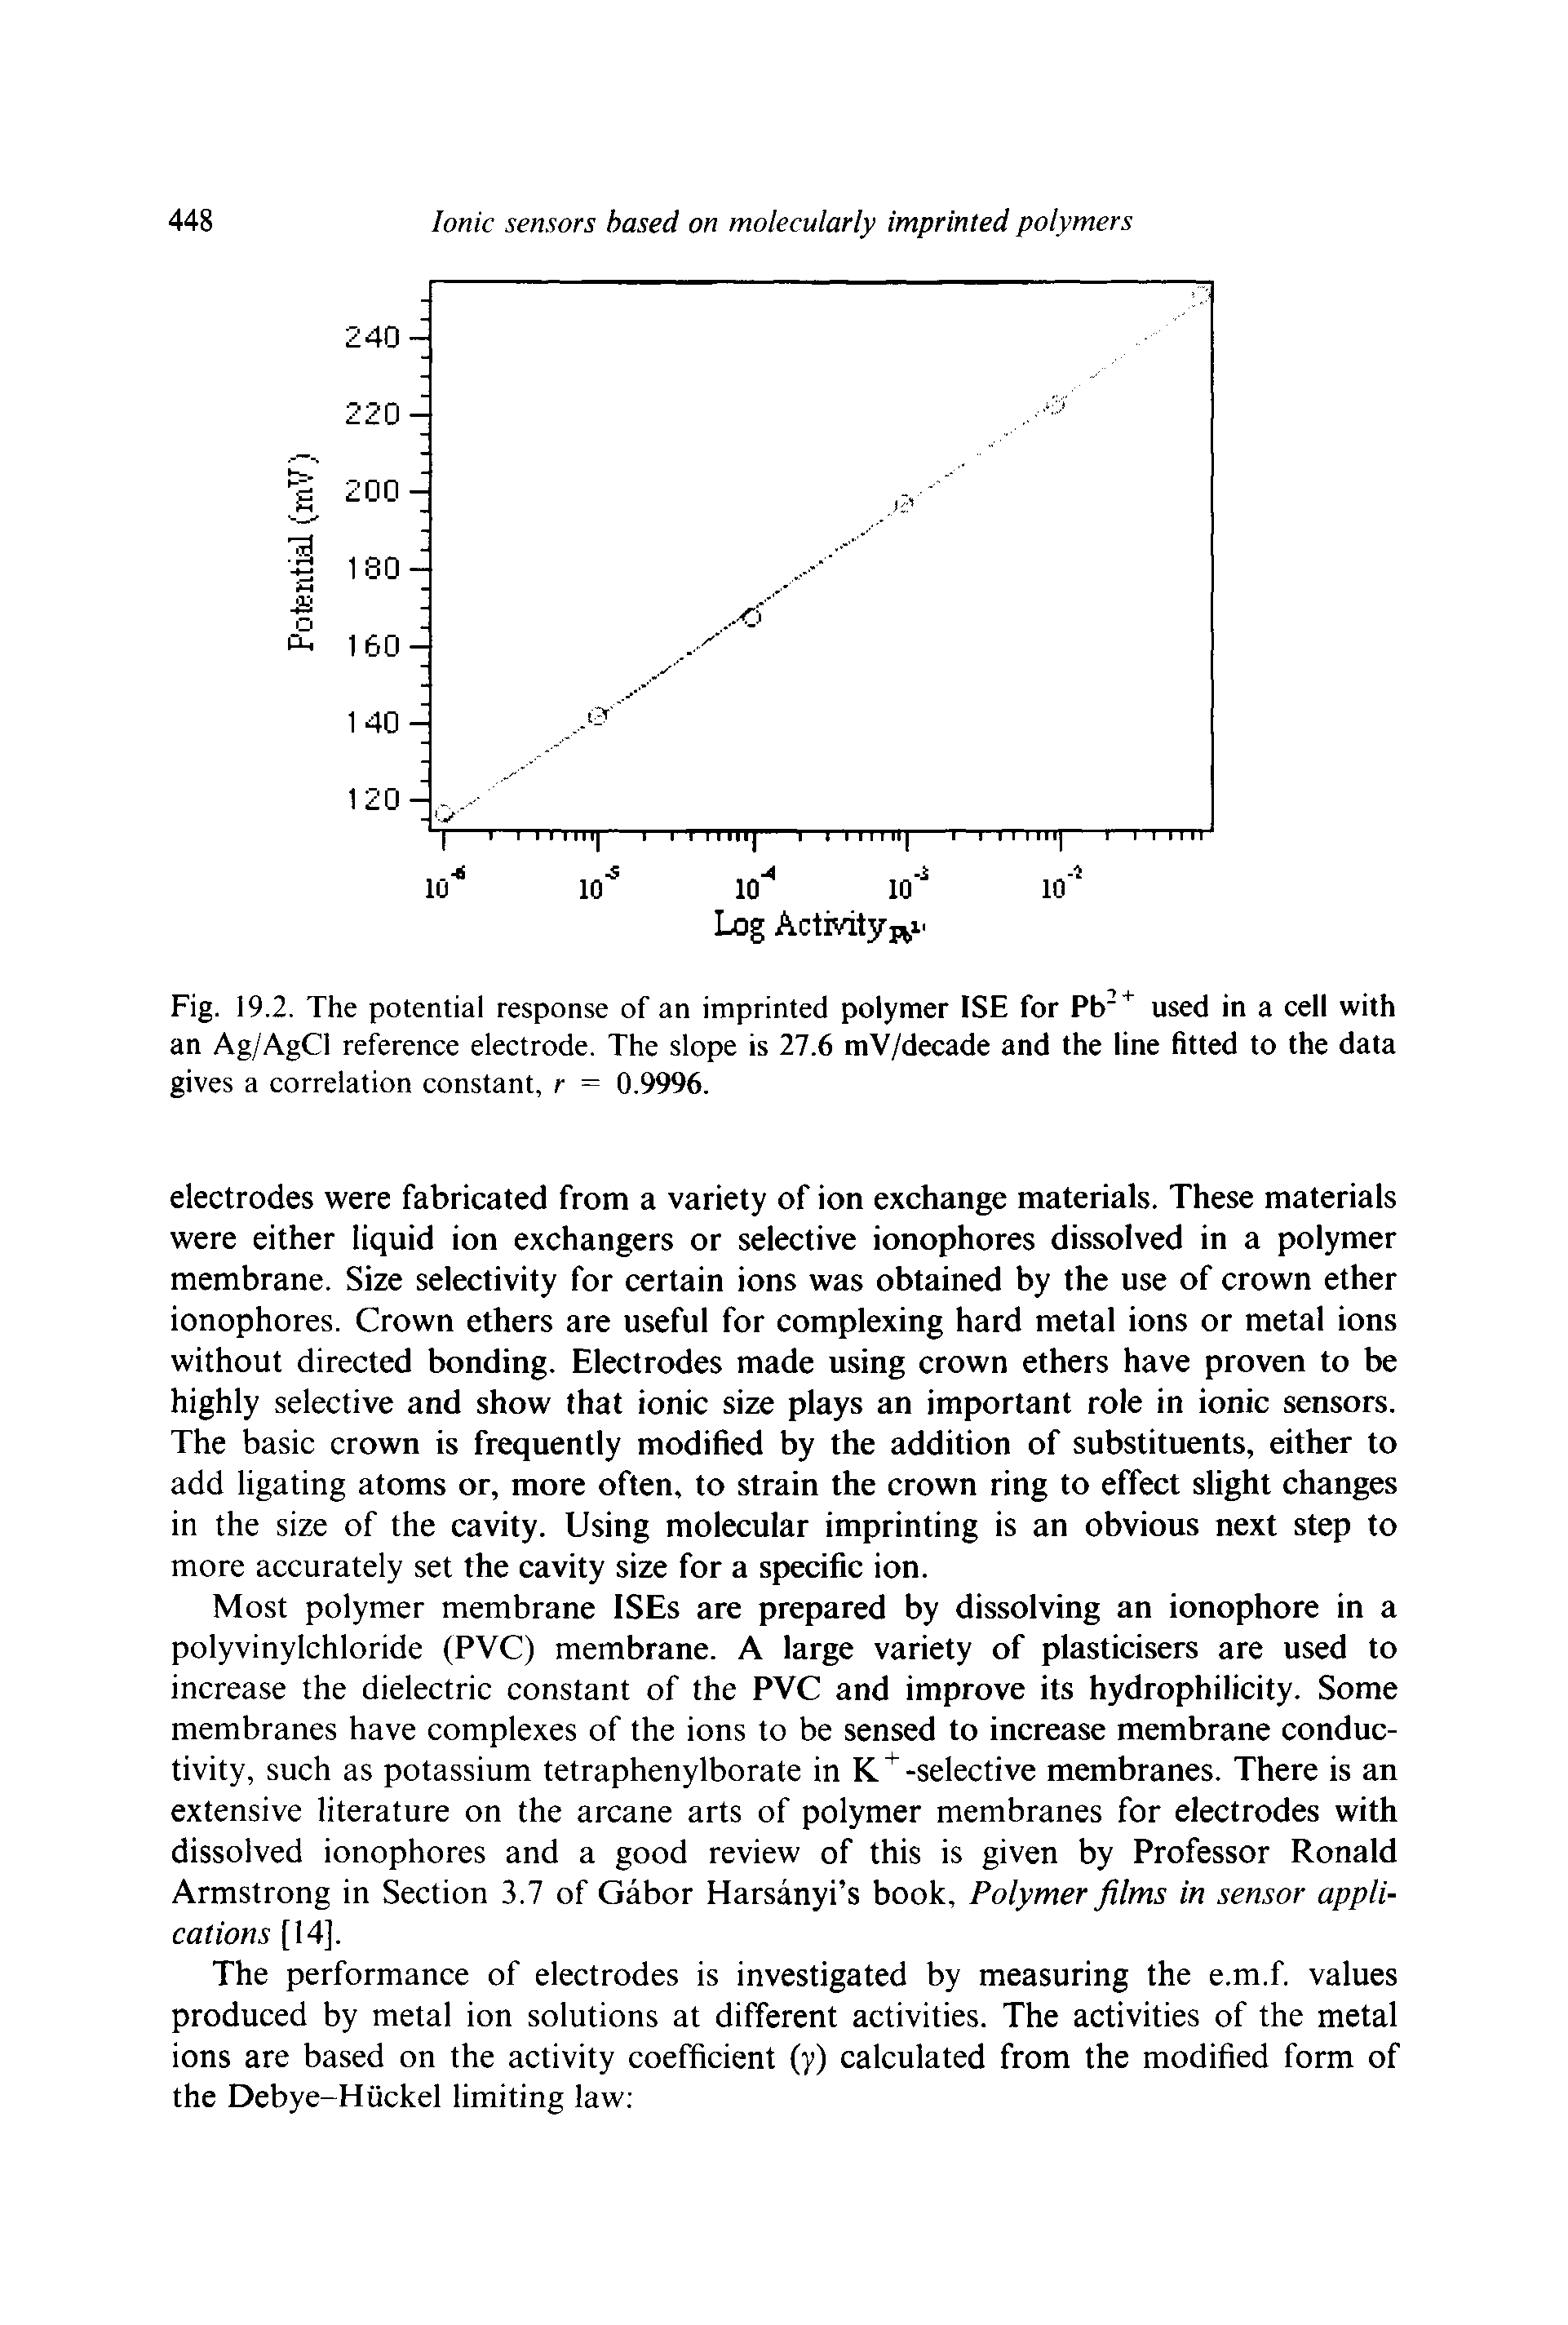 Fig. 19.2. The potential response of an imprinted polymer ISE for Pb used in a cell with an Ag/AgCl reference electrode. The slope is 27.6 mV/decade and the line fitted to the data gives a correlation constant, r = 0.9996.